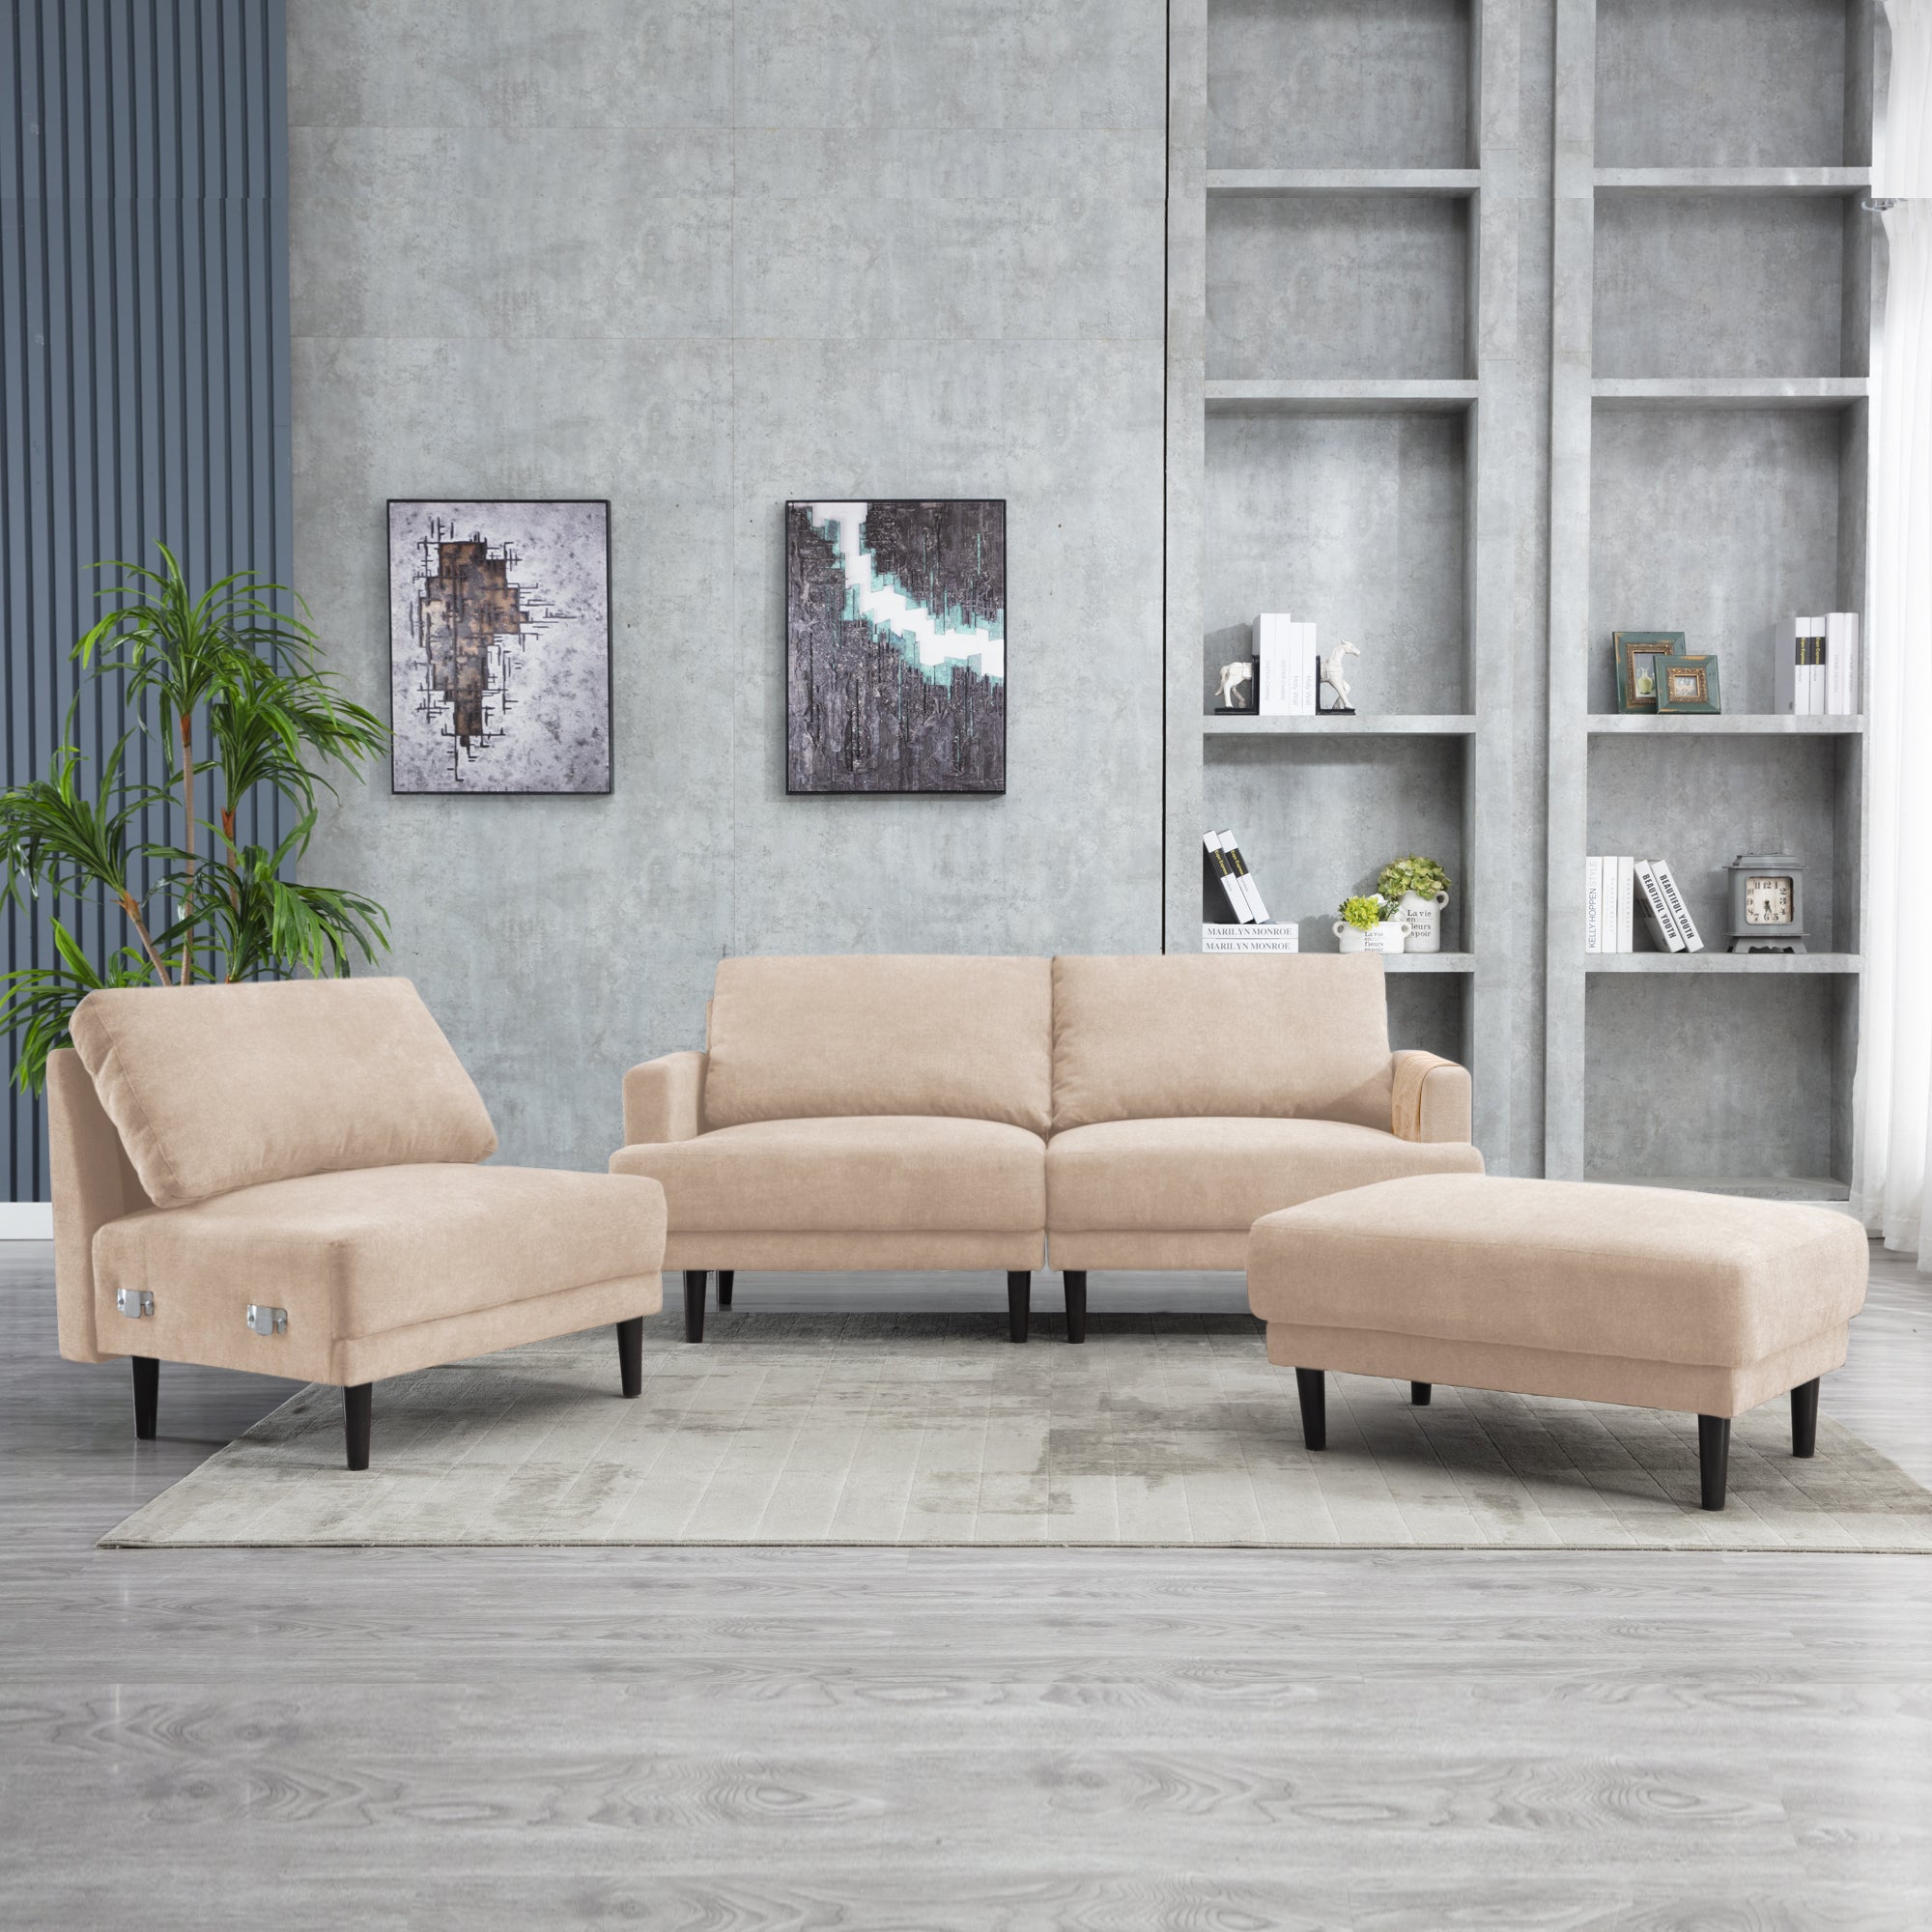 MCombo Sectional Couch Sofa 3-Seat Small Upholstered Modern Sofa with Ottoman Convertible Modular Couch Set for Bedroom Living Room L Shaped Couch Loveseat